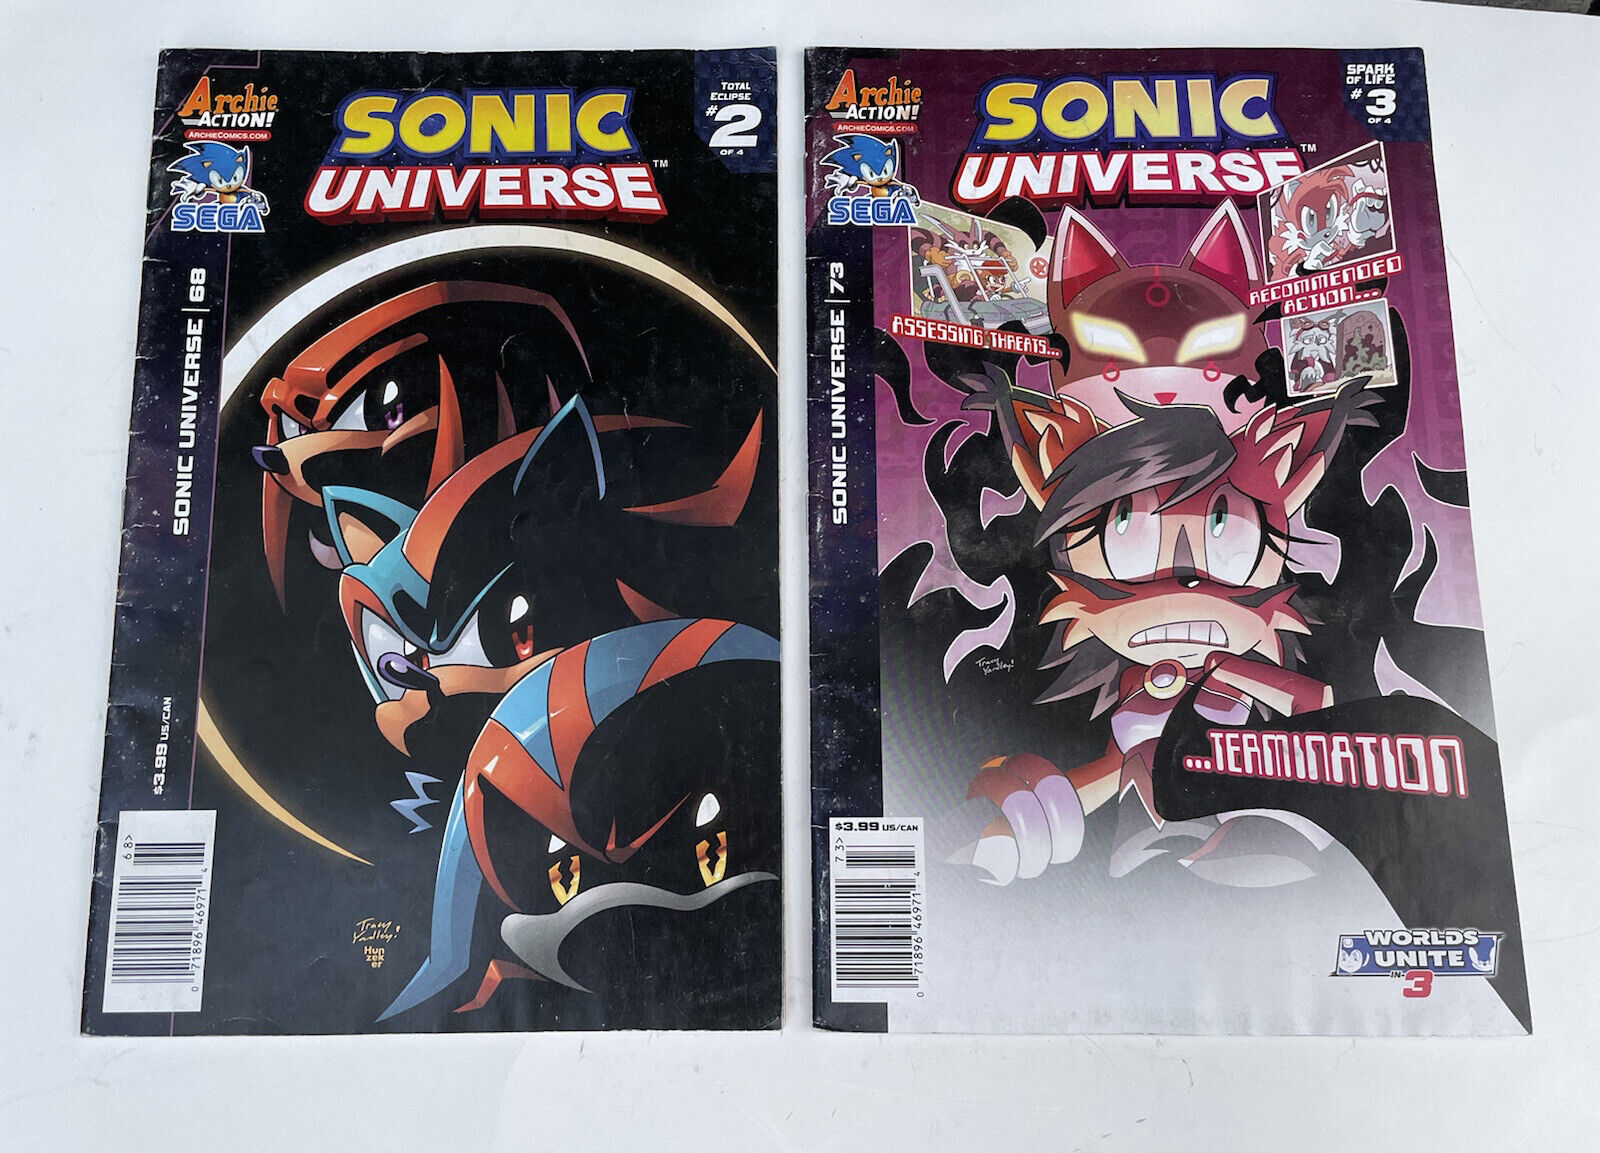 Sonic Universe #68 Total Eclipse 2 Of 4 & Sonic #73 Spark Of Life 3 Of 4